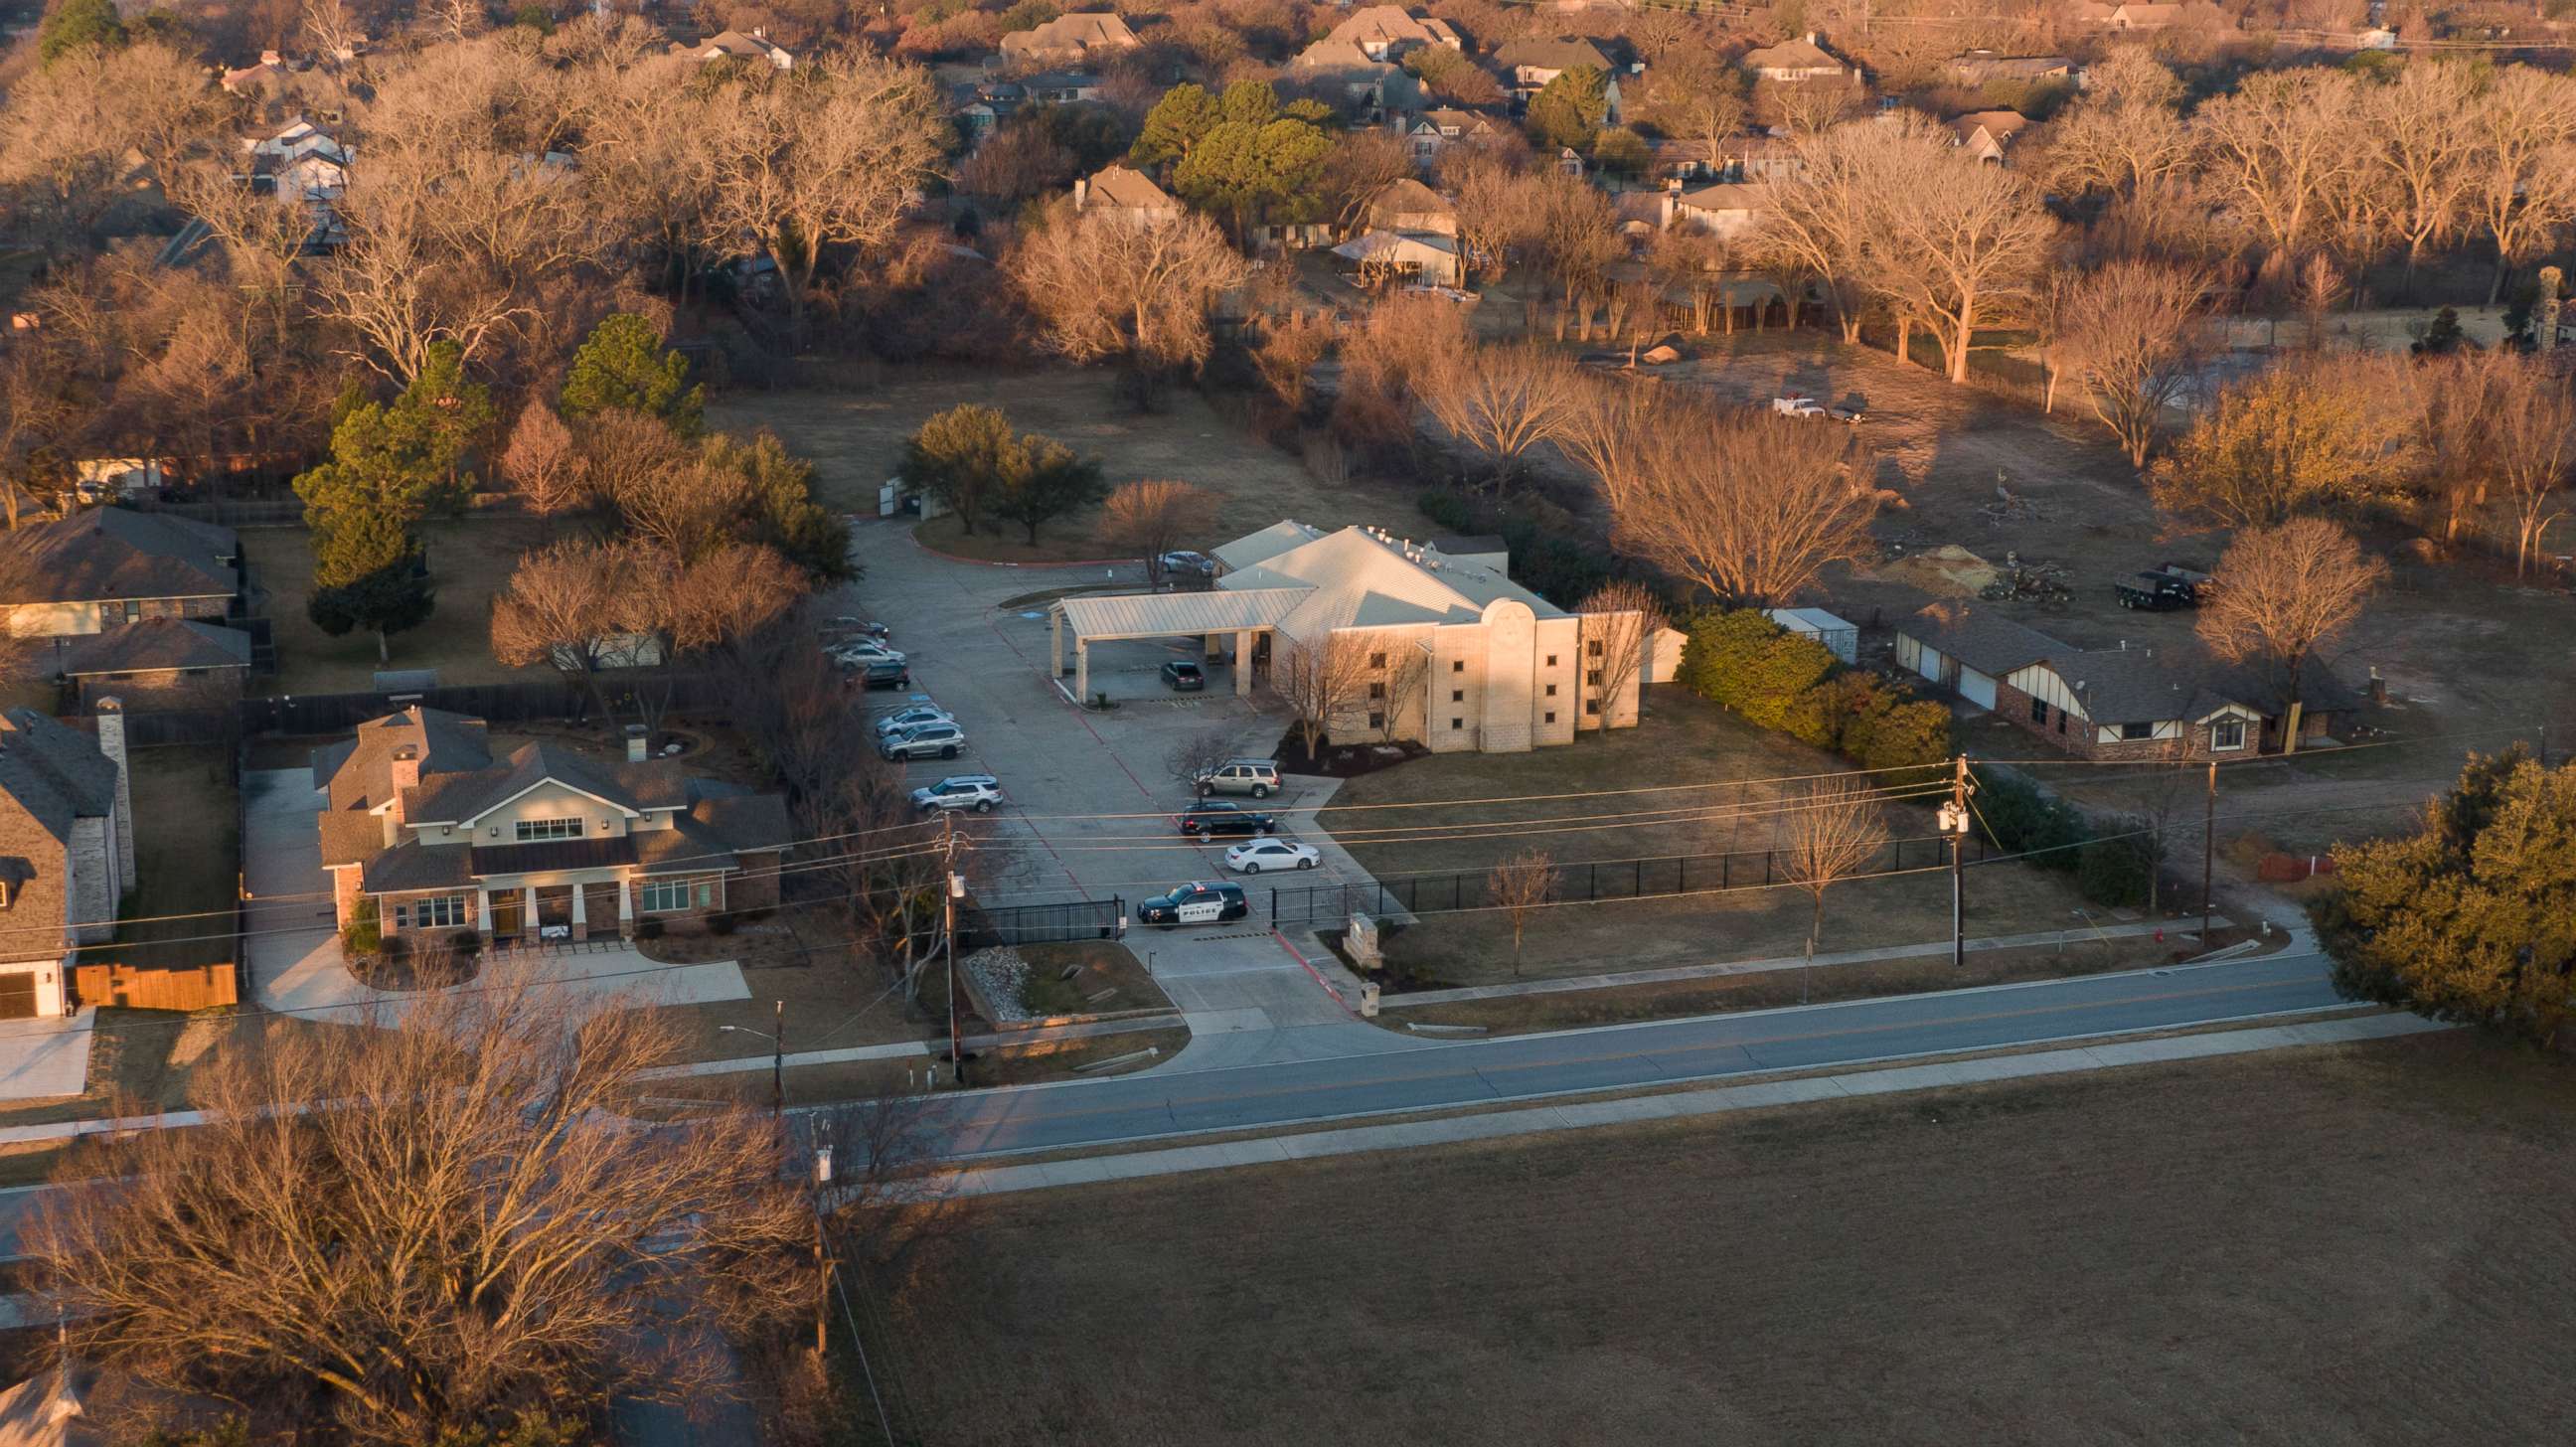 PHOTO: An aerial view of police standing in front of the Congregation Beth Israel synagogue, Jan. 16, 2022, in Colleyville, Texas, where a man held hostages for more than 10 hours inside the temple.